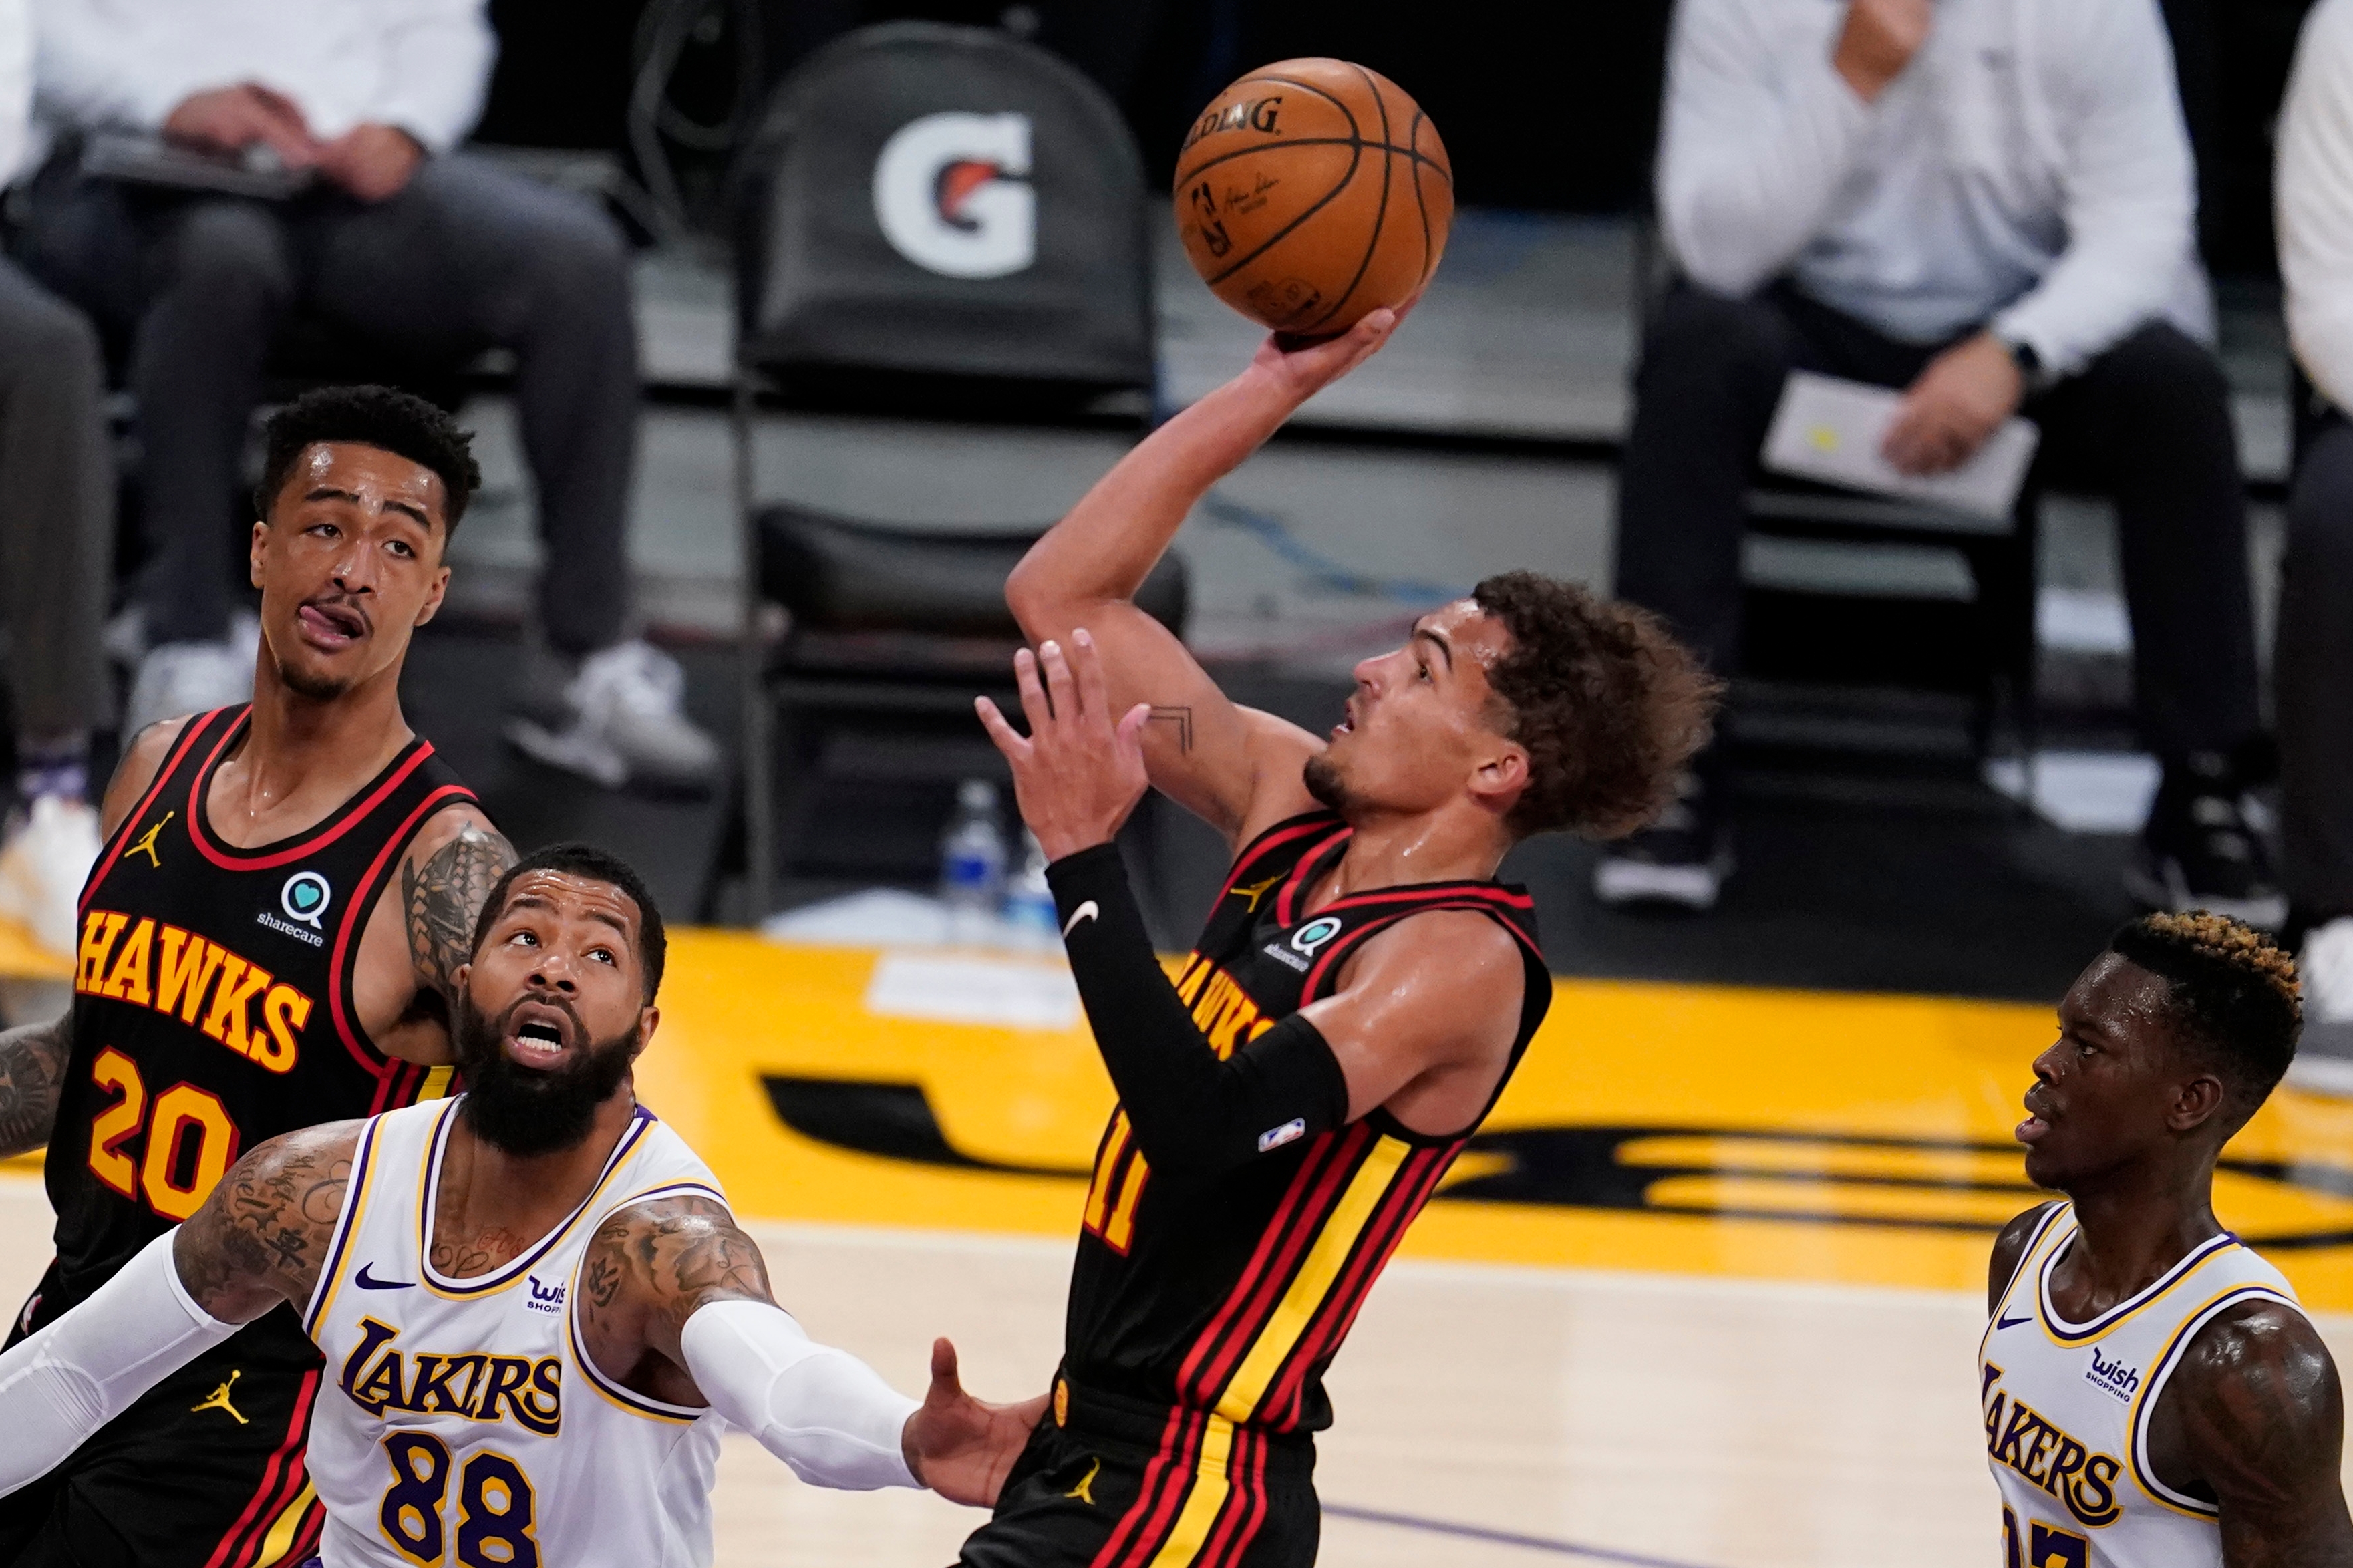 Lakers Vs. Hawks Preview: Road Trip Continues On LeBron James